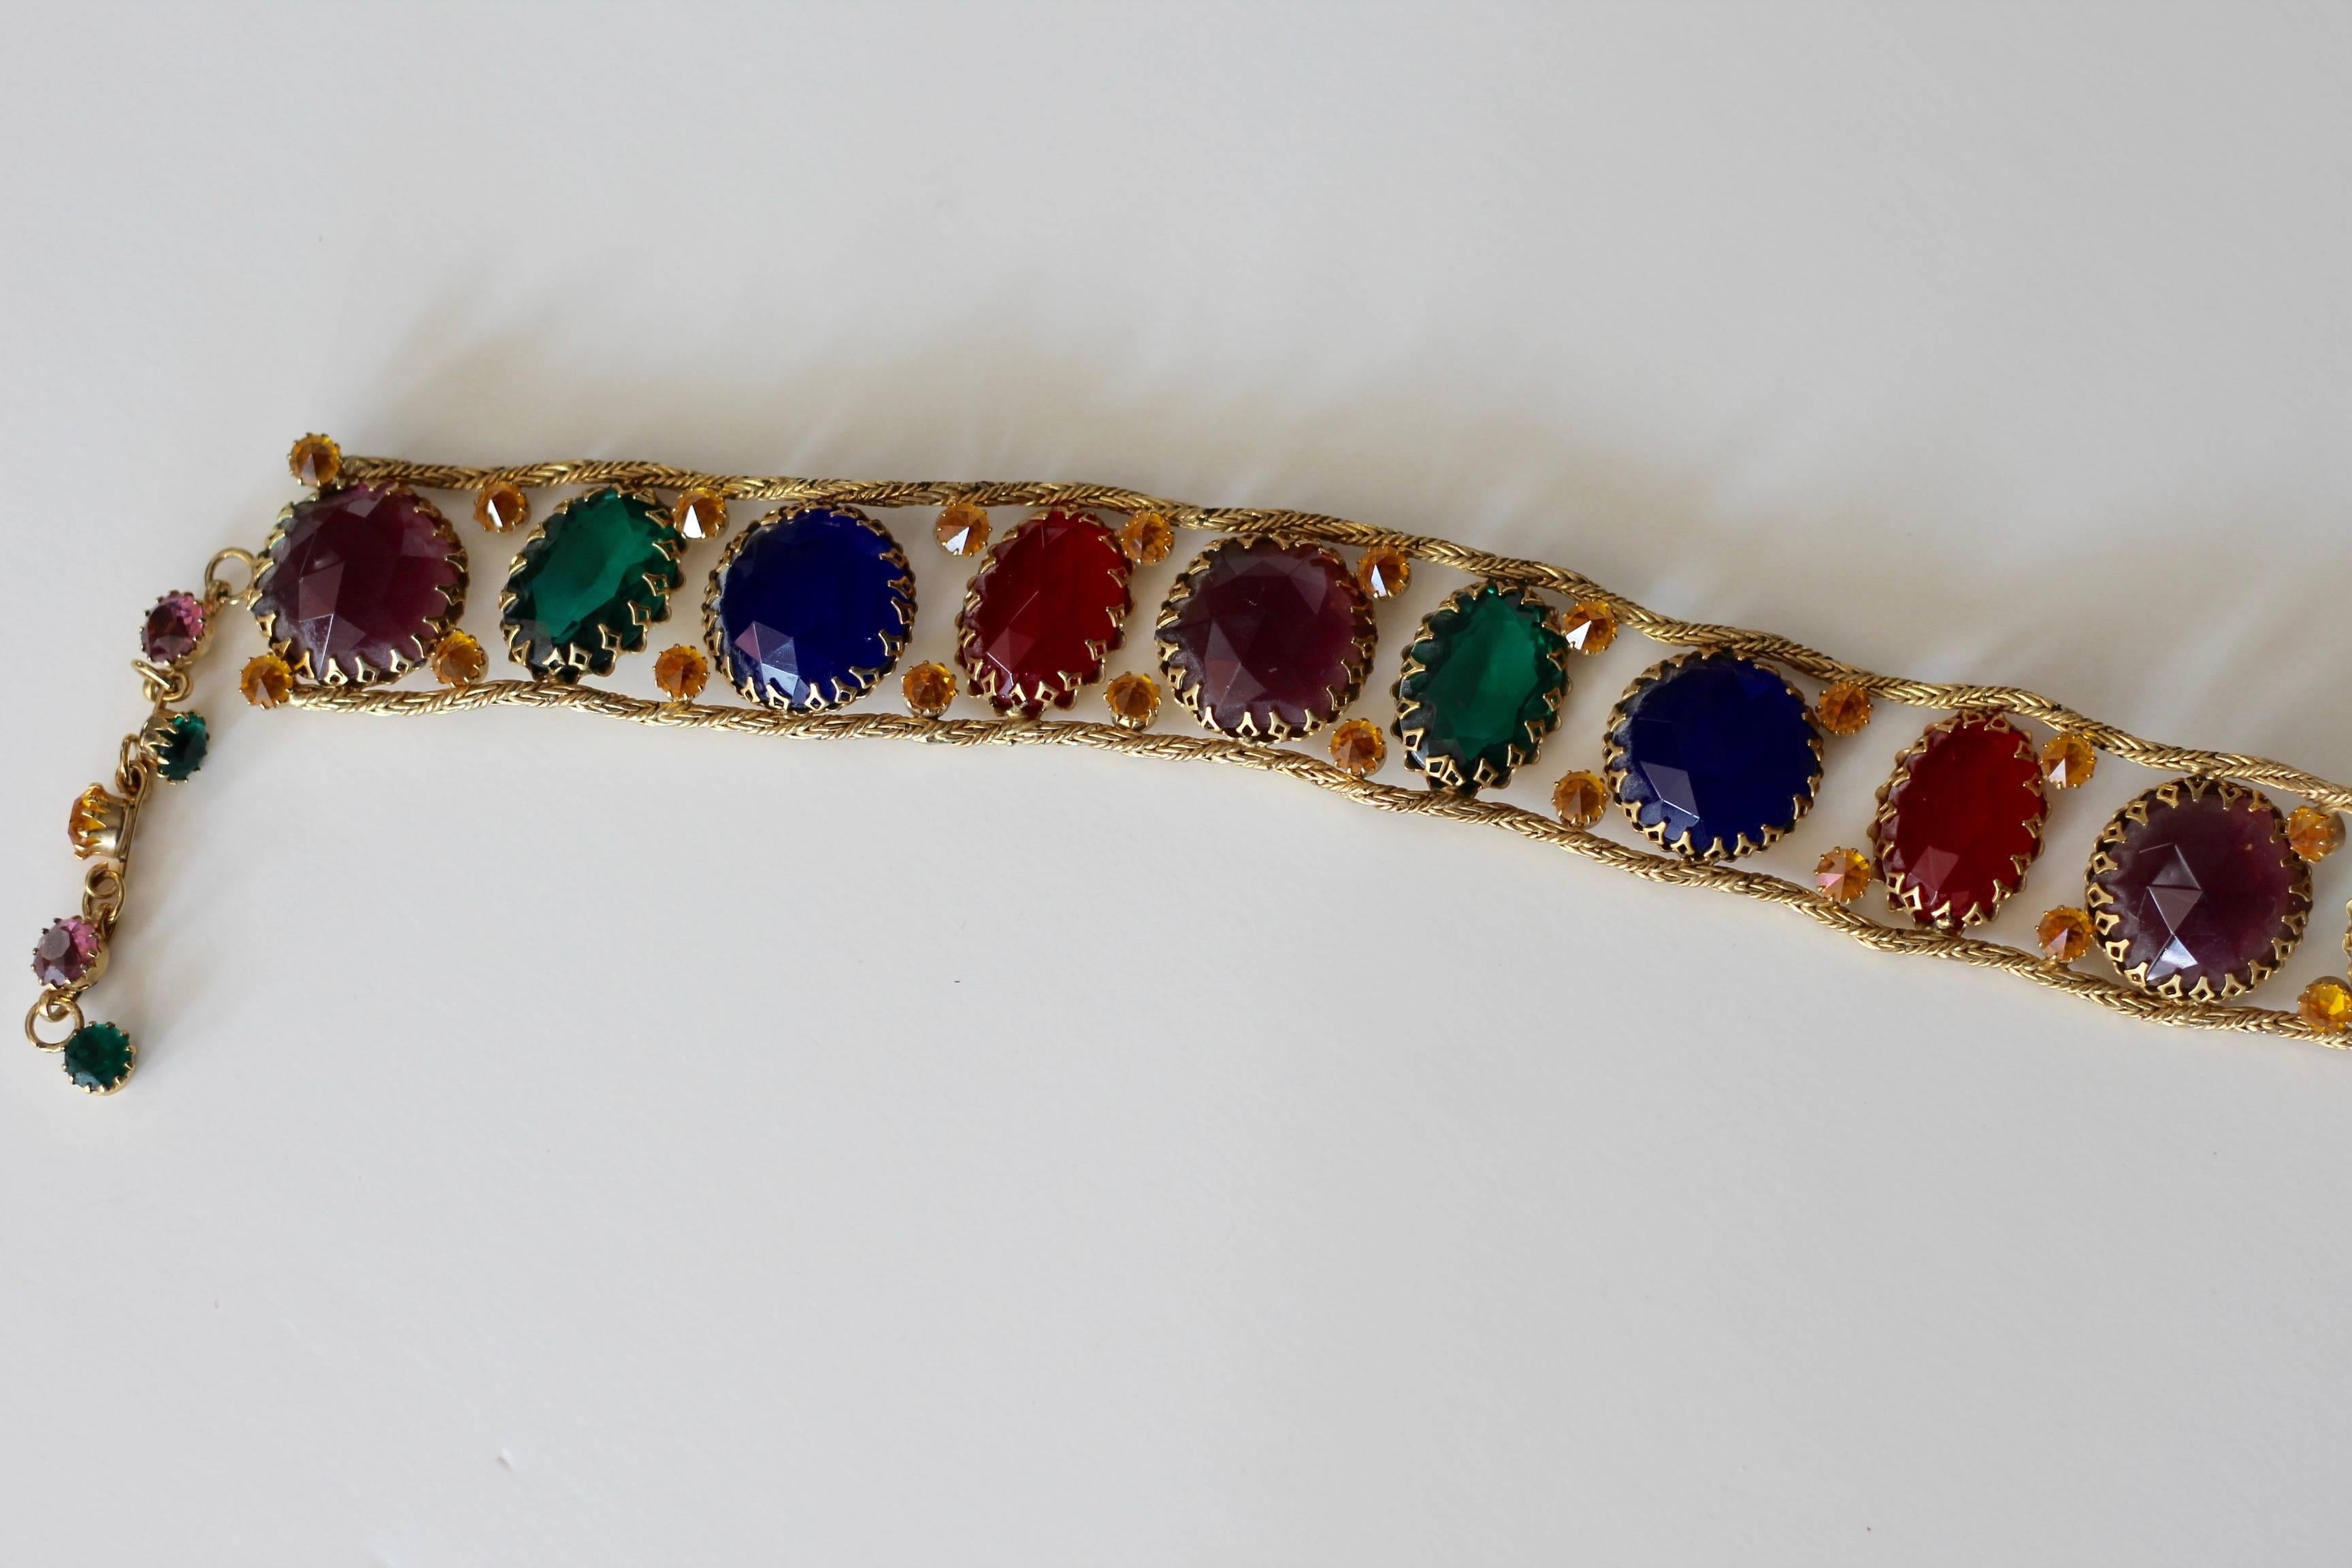 1960s glamourous gold toned, multicolored jeweled belt unsigned by Schreiner of New York. Has round and oval shaped faceted faux gemstones in varying sizes and colors; red, amber, green, blue, and lavender. Stones are joined together by gold toned